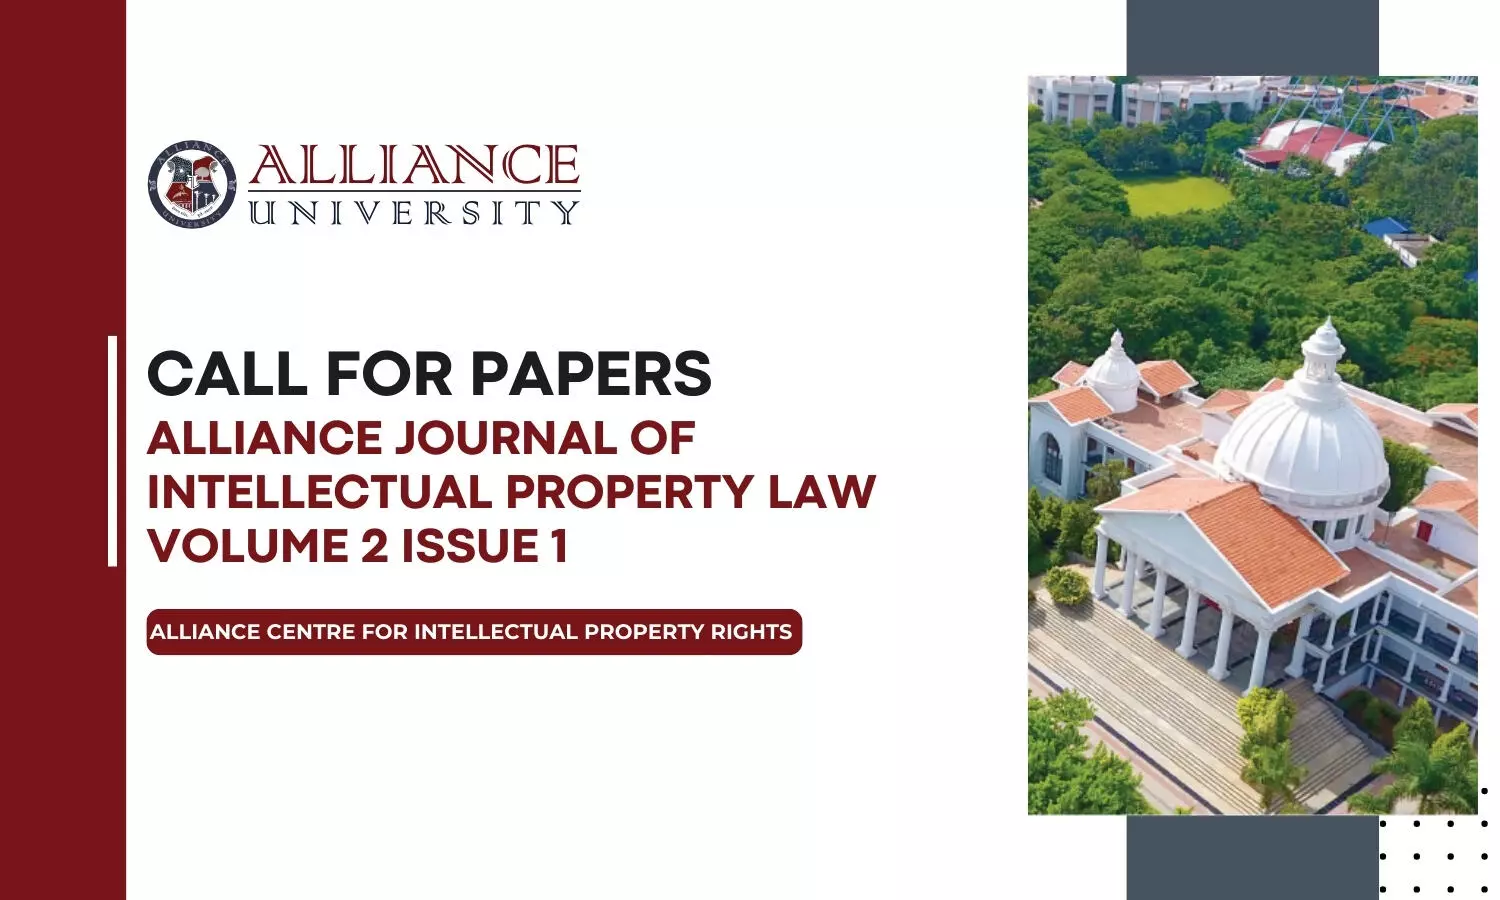 Call for Papers: Alliance Journal of Intellectual Property Law Volume 2 Issue 1